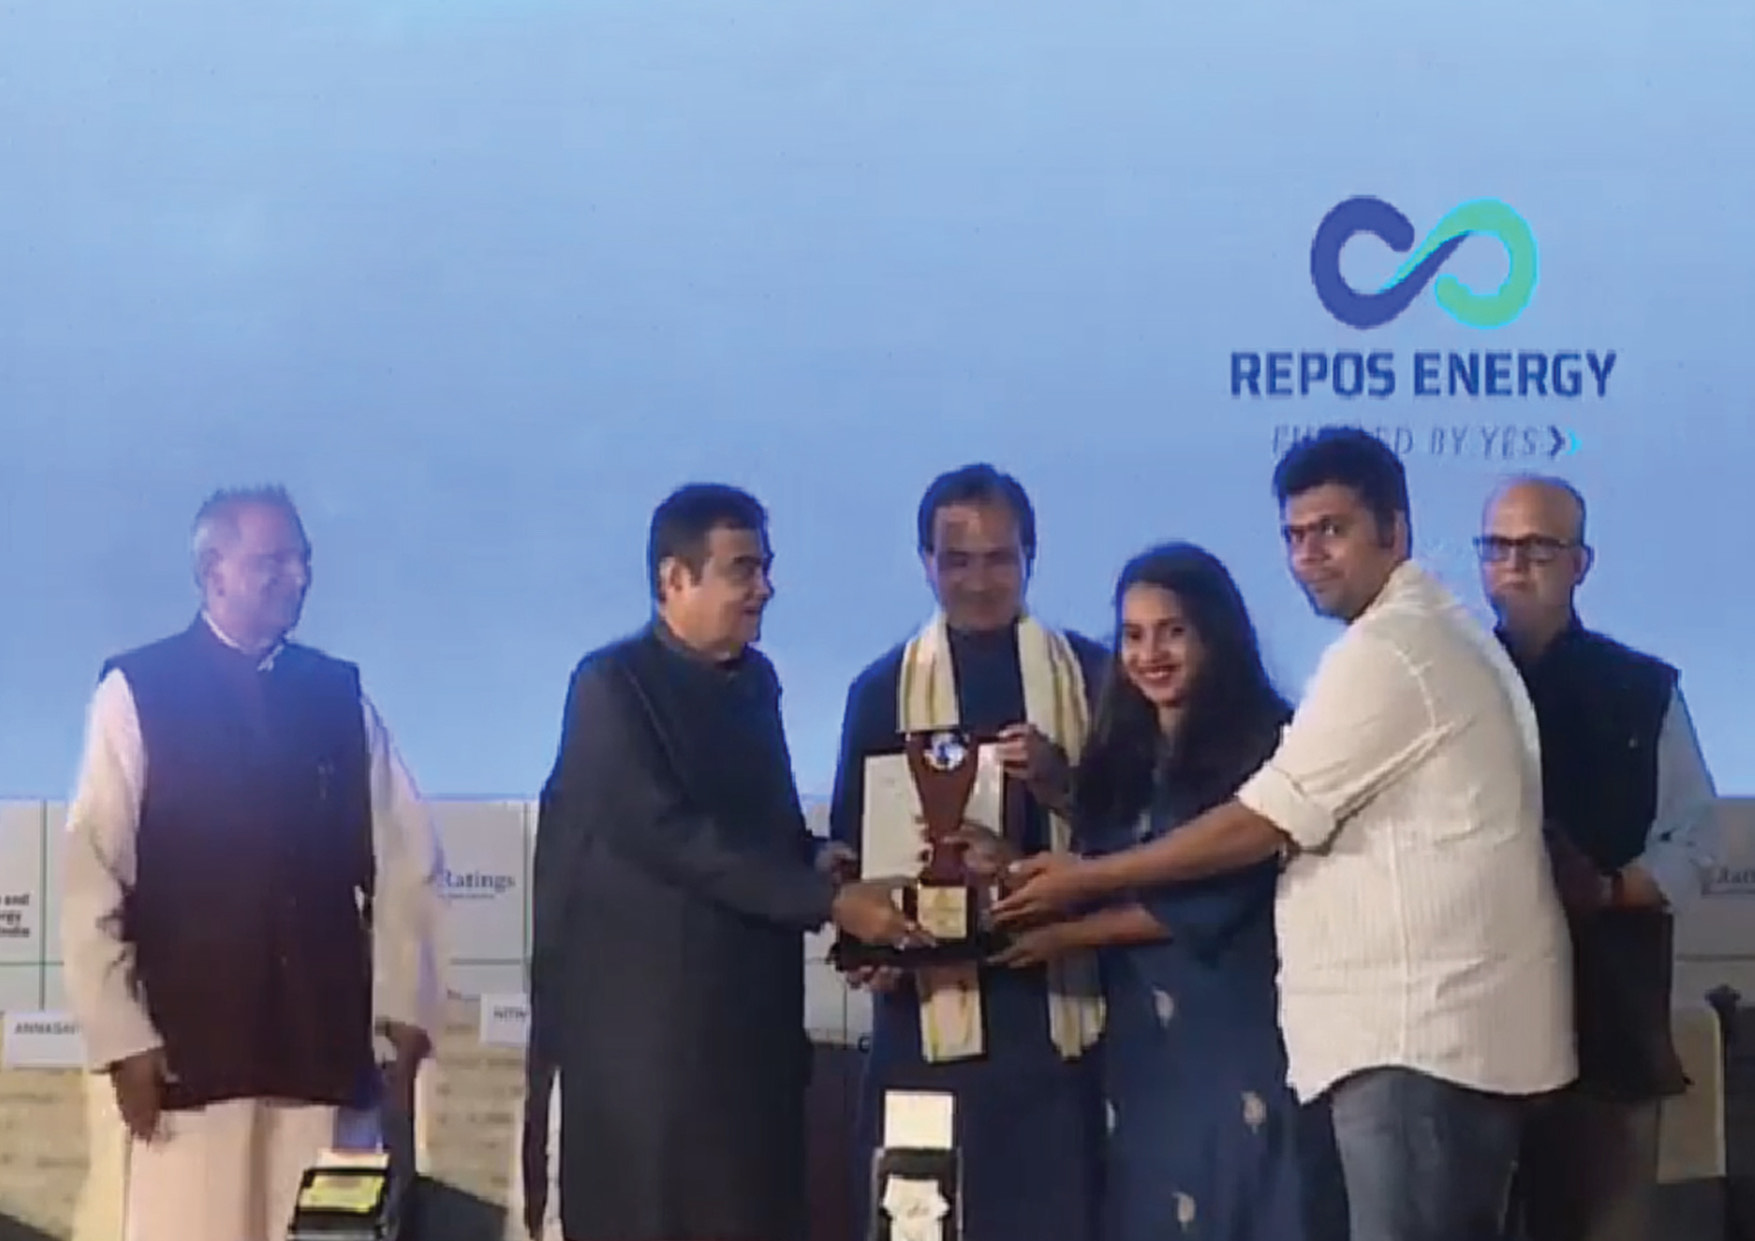 Repos was Awarded the Green Energy Award for its innovations.